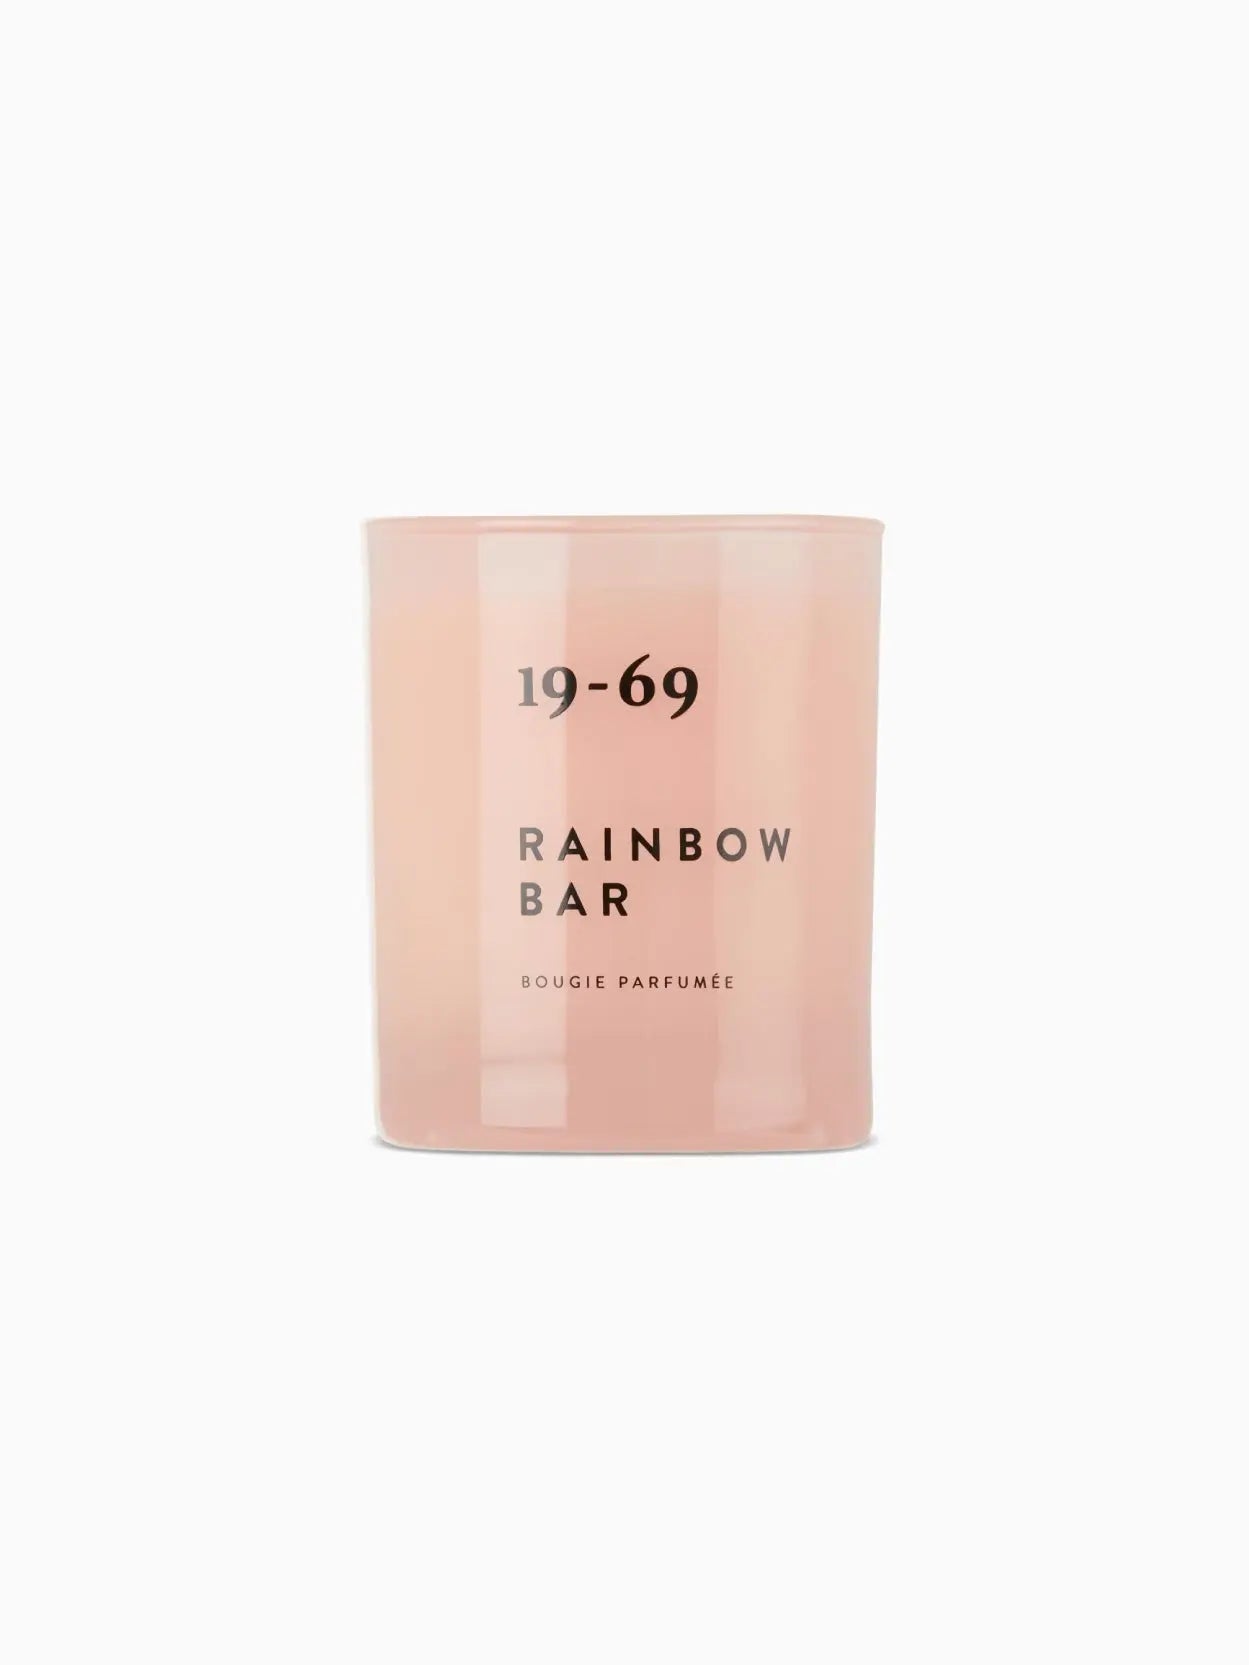 A pink candle labeled "Rainbow Bar Candle 200ml" by 19-69 in black text is displayed against a white background. The candle has a minimalistic design with its name and type "BOUGIE PARFUMÉE" printed below the main label, available exclusively at Bassalstore in Barcelona.